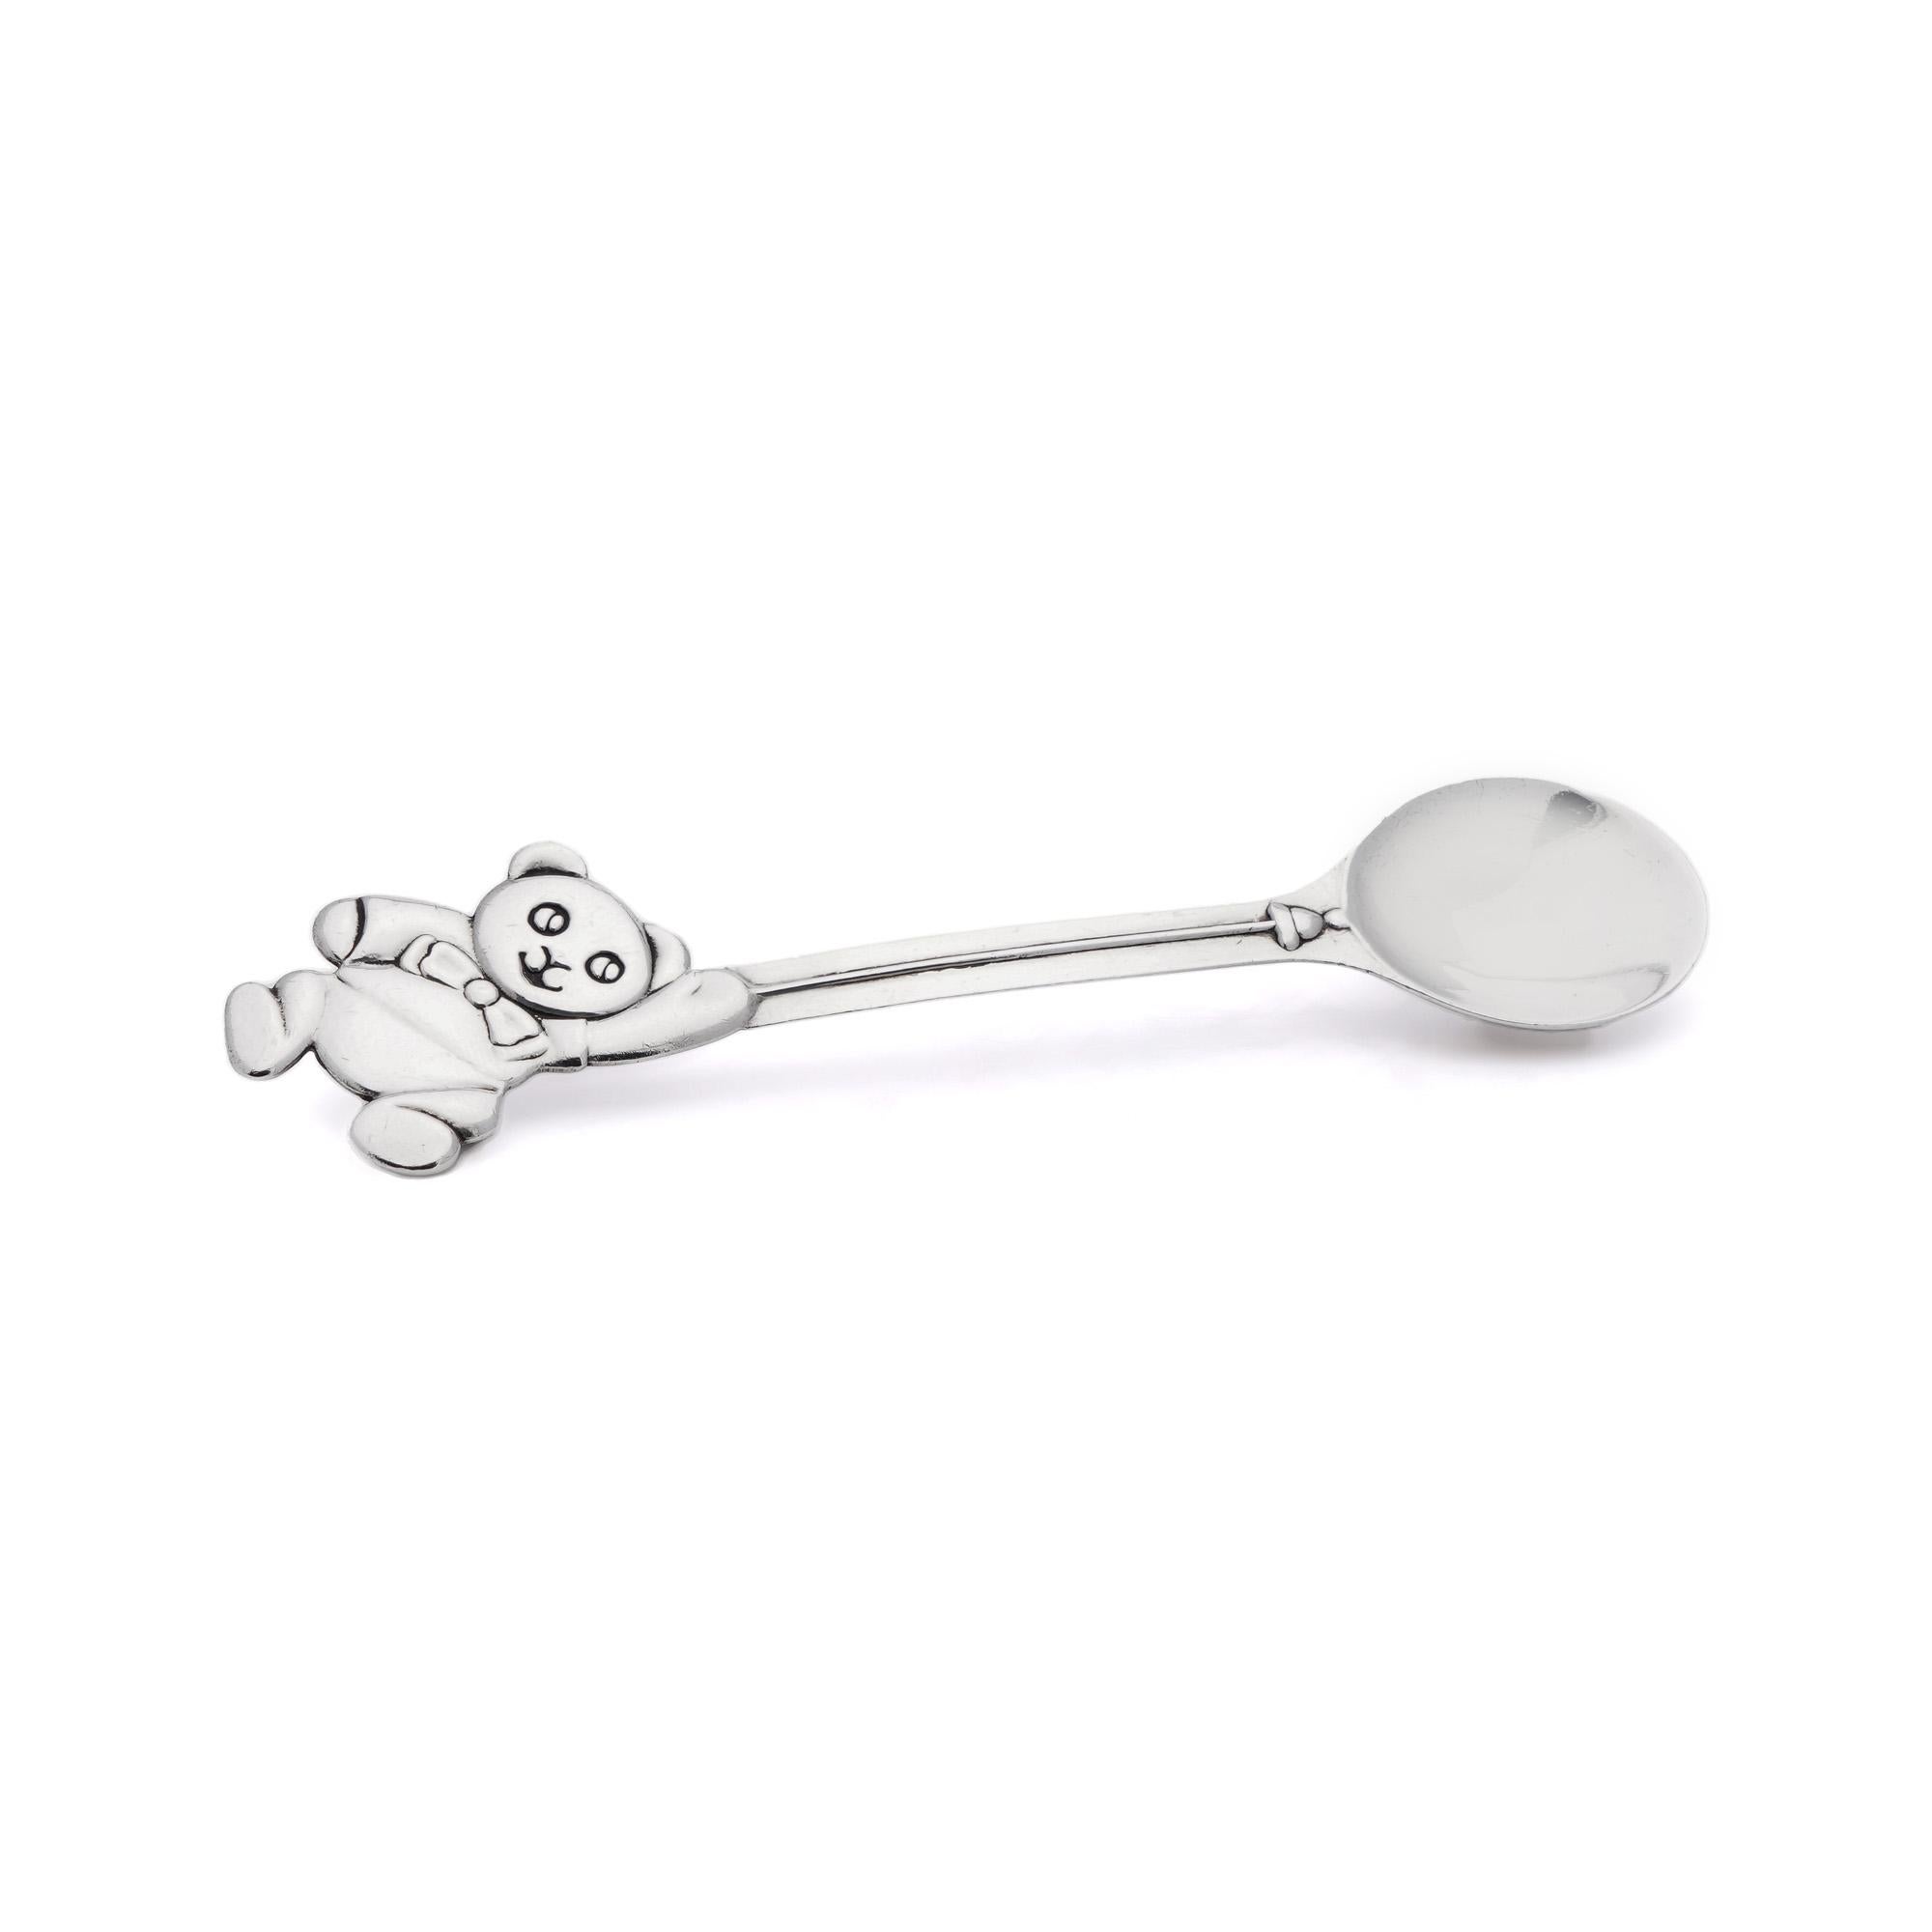 Tiffany & Co. Sterling Silver Teddy Bear Baby Child Feeding Spoon.
Hallmarked with Tiffany & Co. Sterling 925, 1992. 

Dimension:
Length: 13.5 cm
Width: 3 cm 
Height: 0.8 cm 
Weight: 36 grams 

Condition: General usage, minor wear, and tear, good